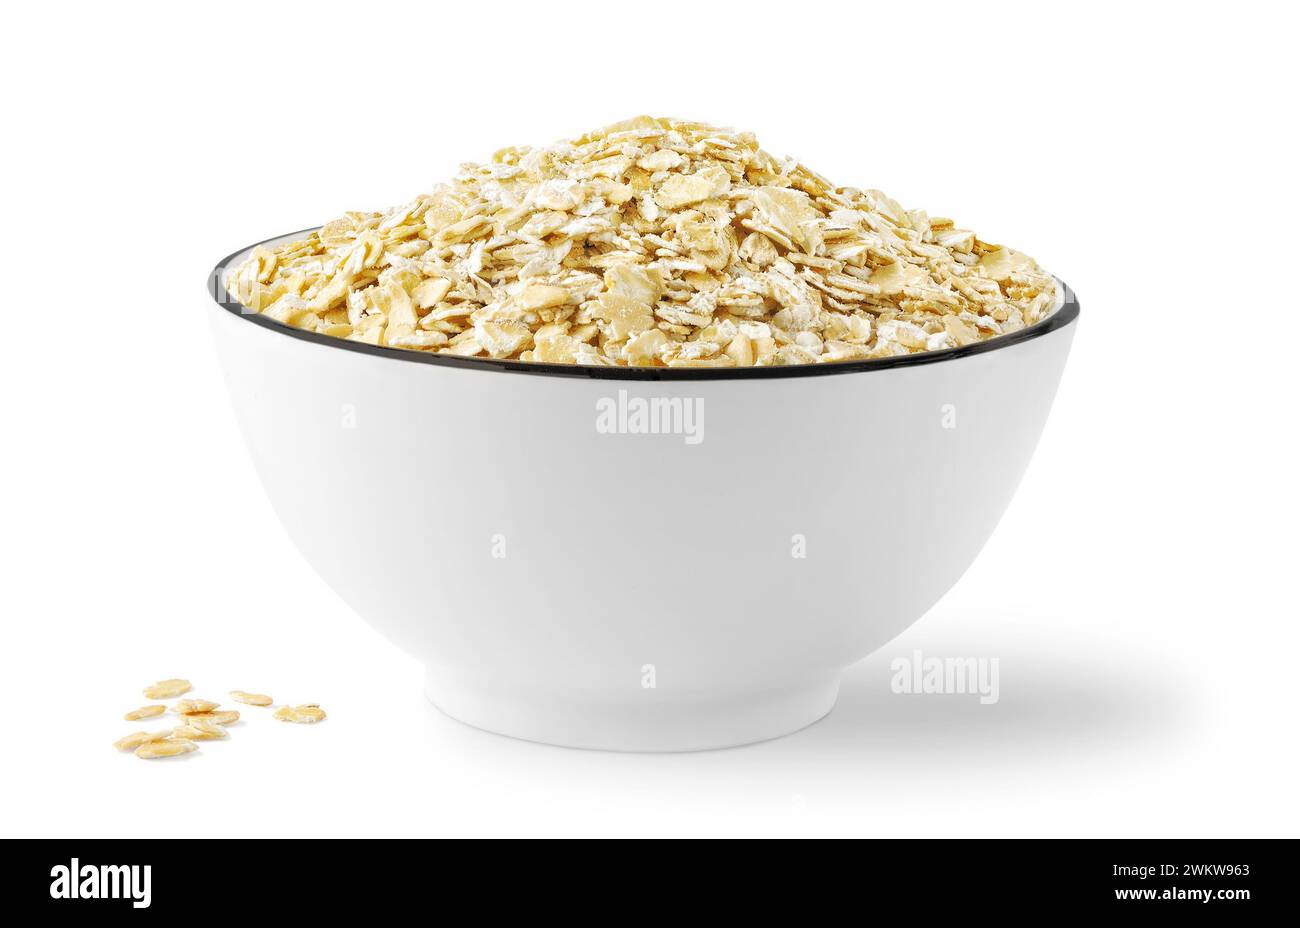 Bowl of dry rolled oats, isolated on white background Stock Photo